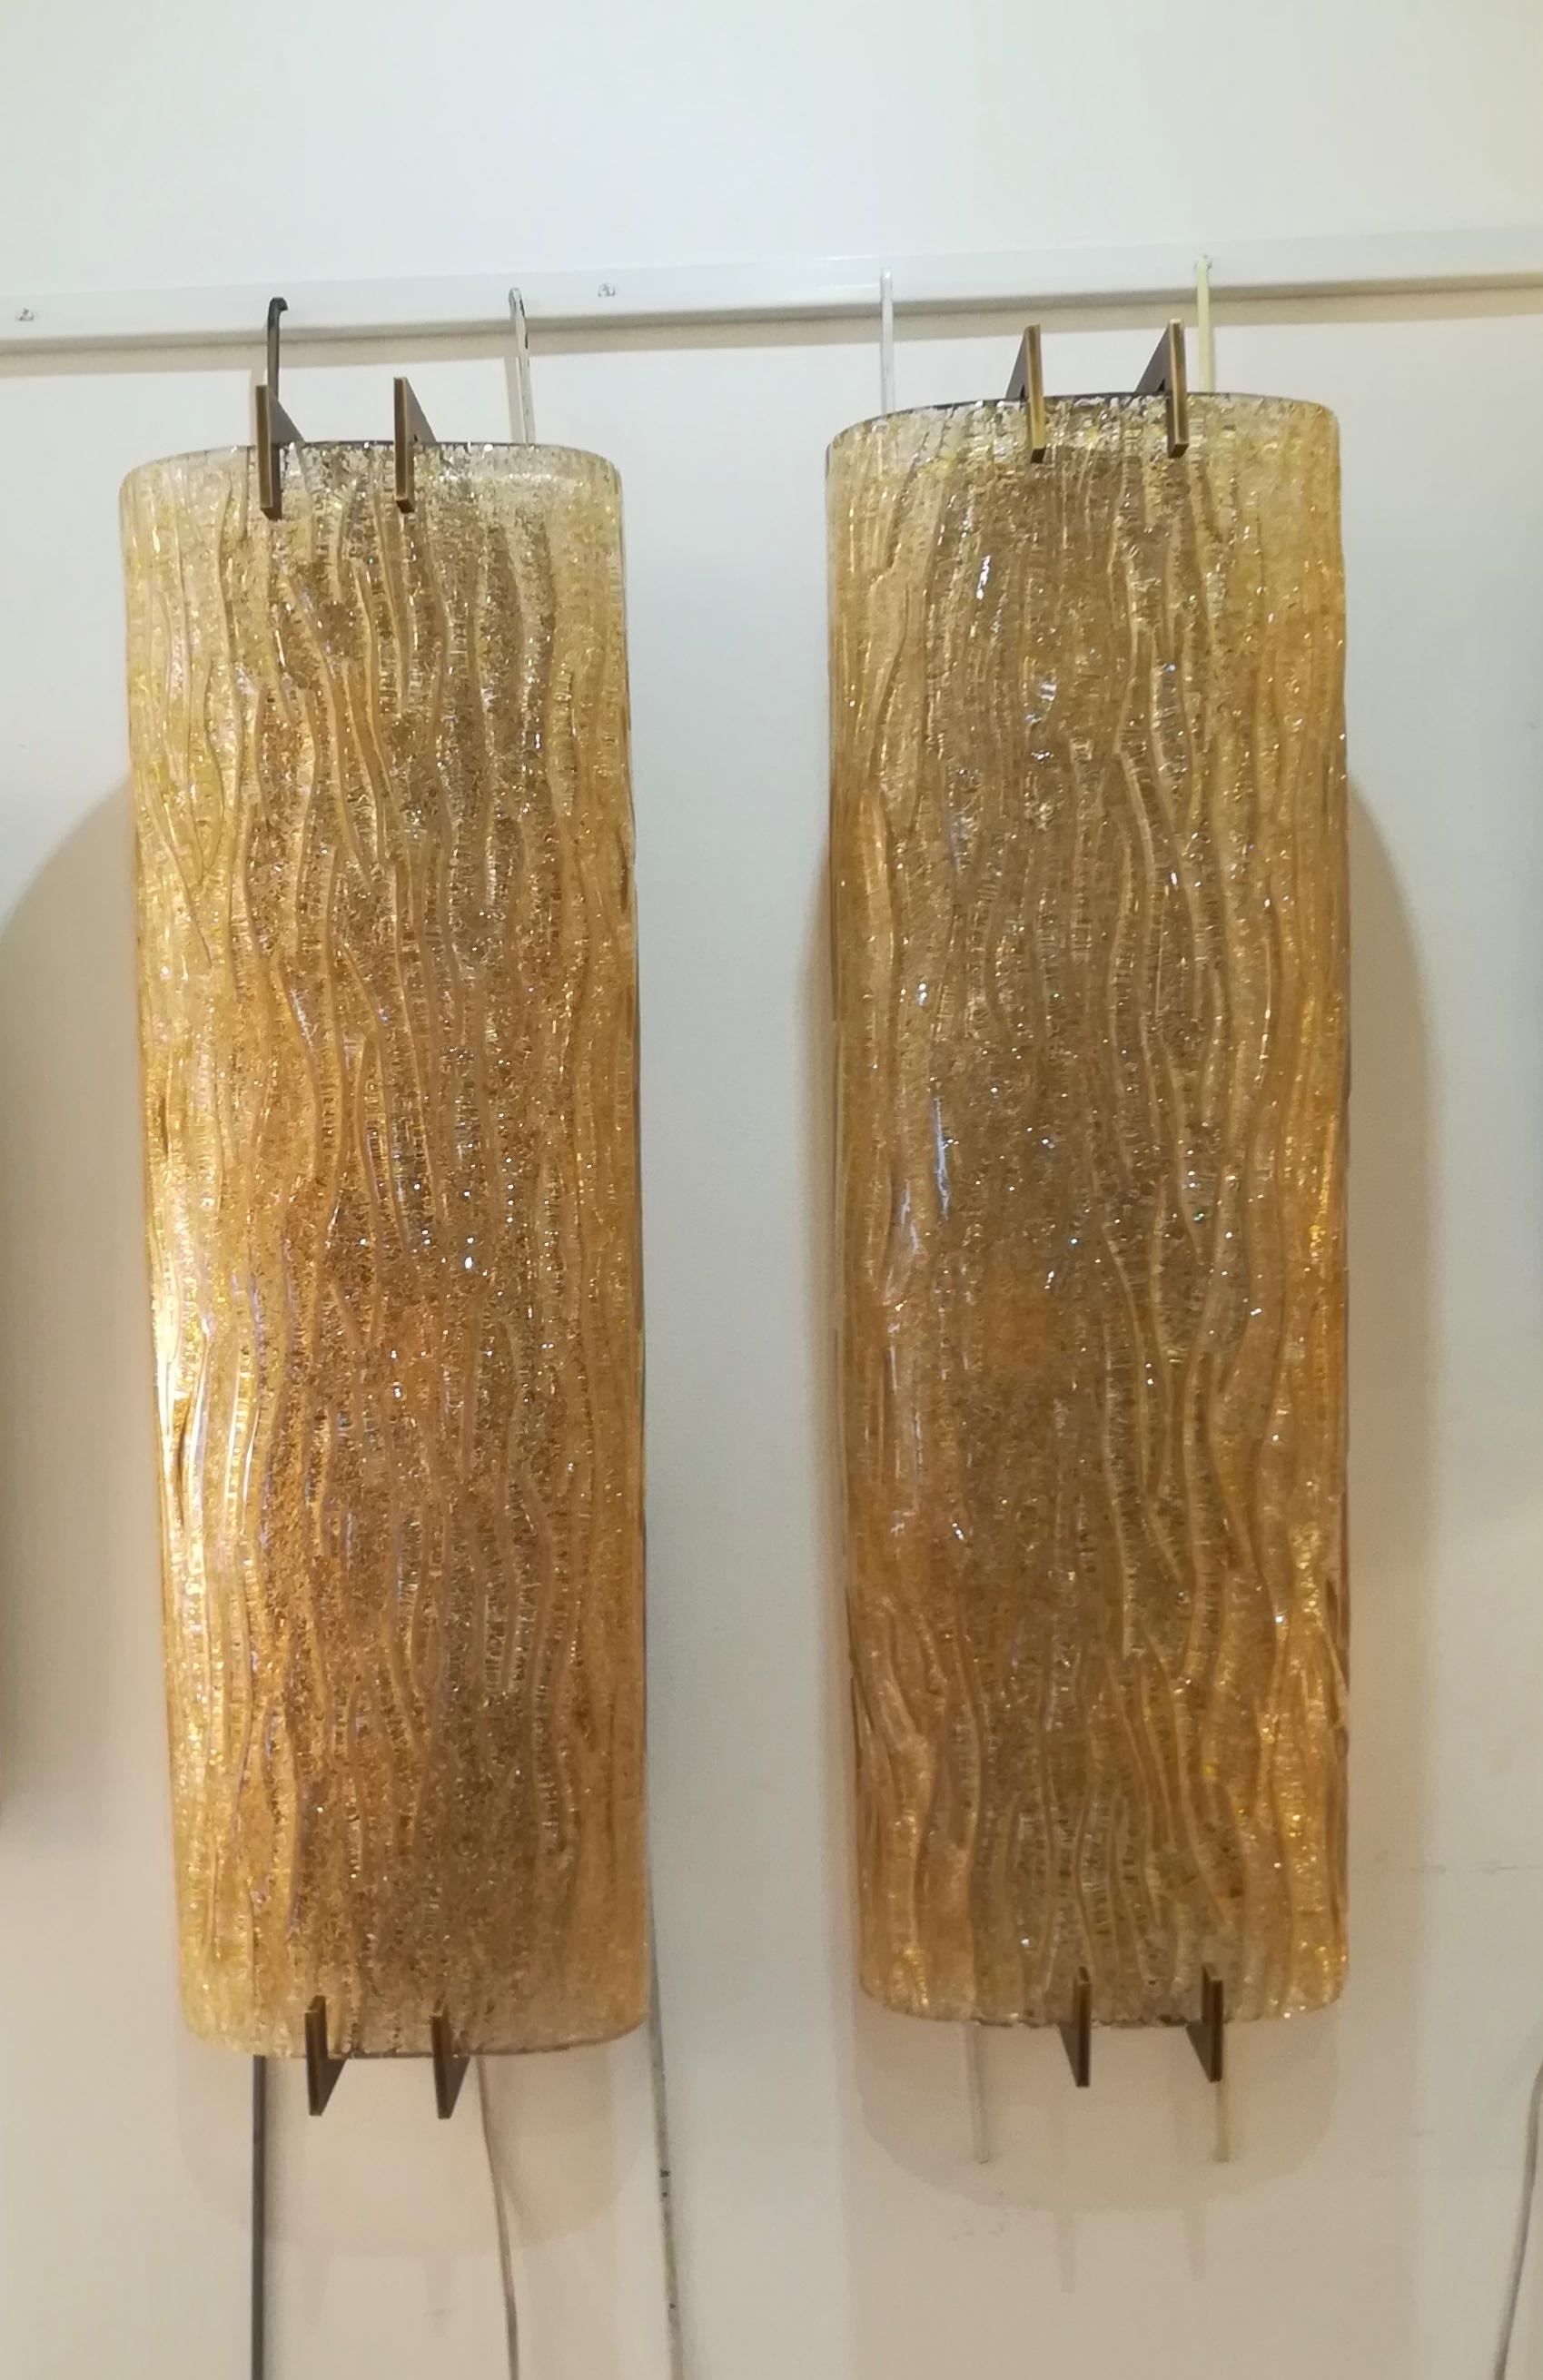 Pair of sconces thick glass and patinated brass.
Four bulbs per unit.
In excellent condition.